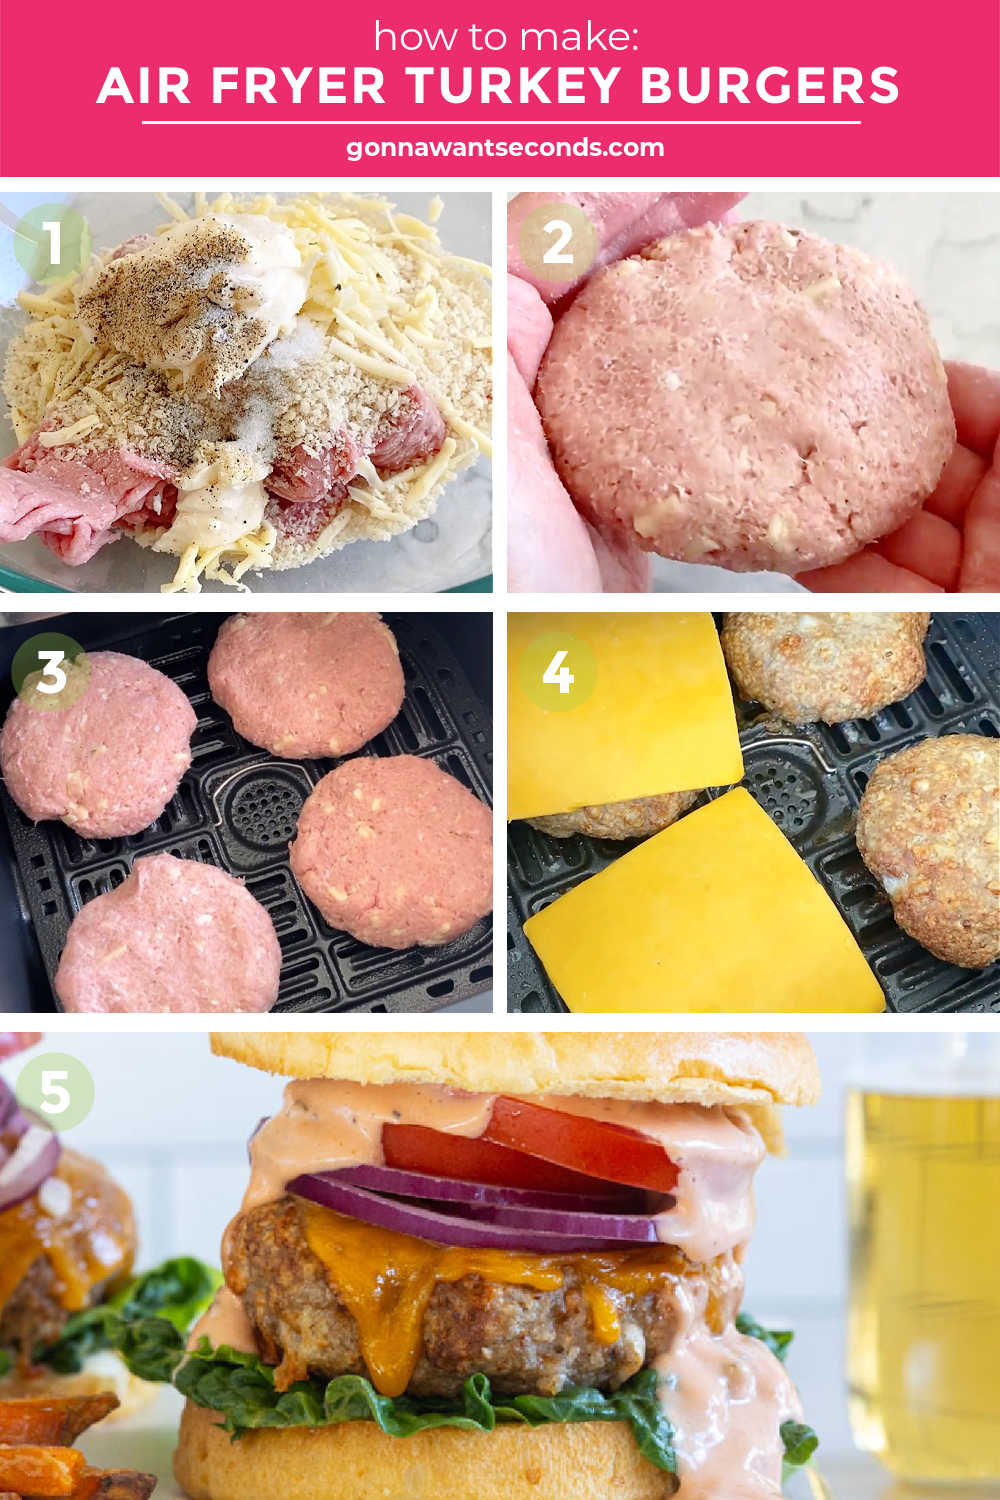 Step by step how to make air fryer turkey burgers